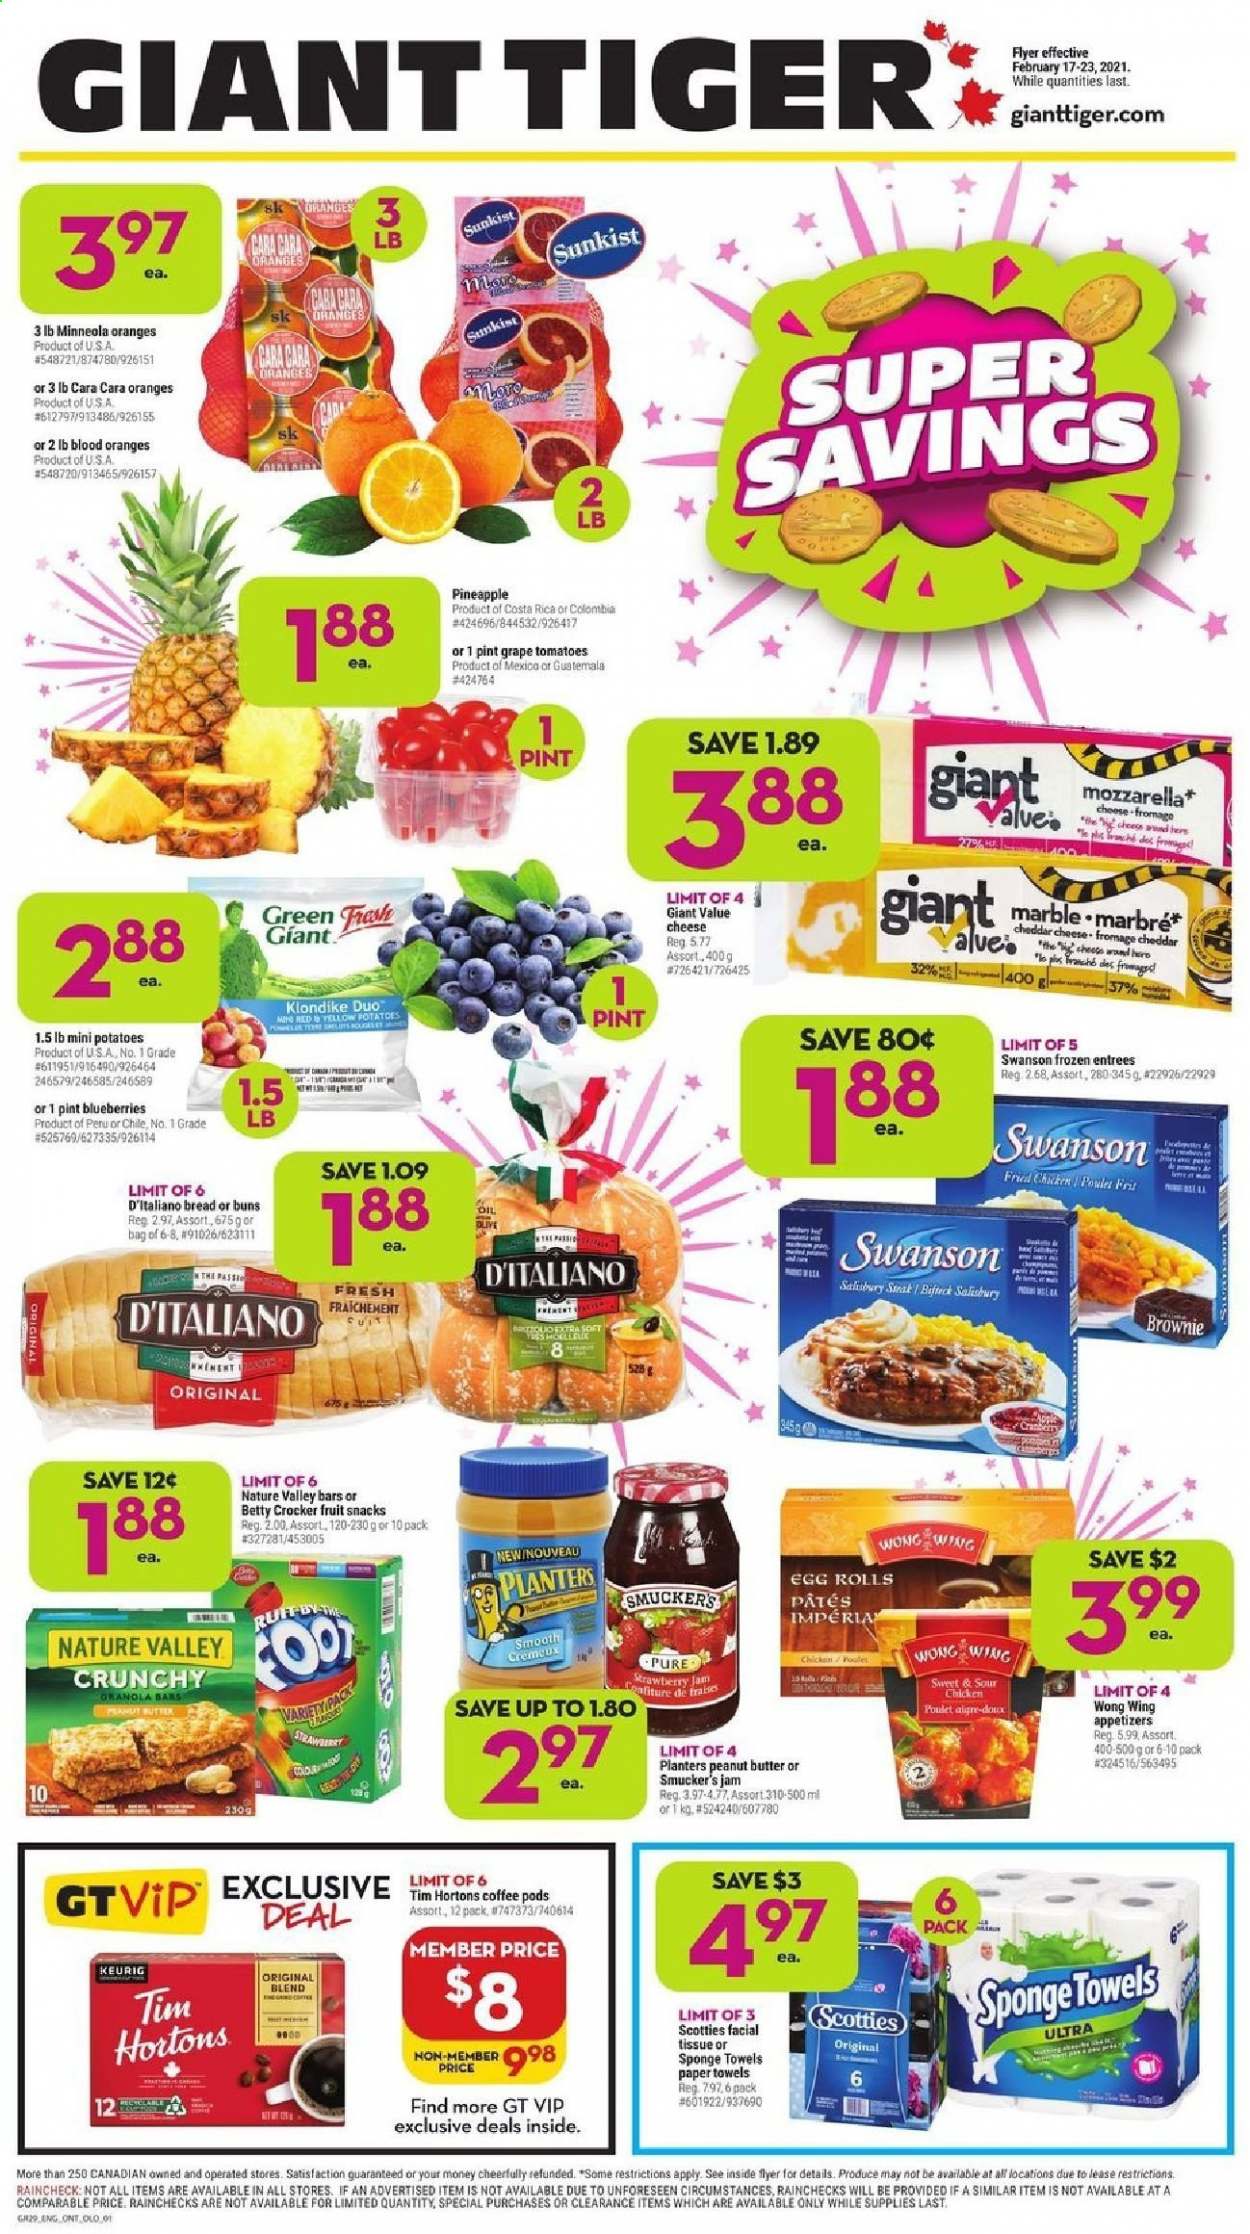 thumbnail - Giant Tiger Flyer - February 17, 2021 - February 23, 2021 - Sales products - bread, buns, brownies, tomatoes, potatoes, blueberries, pineapple, egg rolls, cheddar, cheese, fruit snack, Nature Valley, fruit jam, peanut butter, Planters, coffee pods, Keurig, tissues, kitchen towels, paper towels, sponge, steak. Page 1.